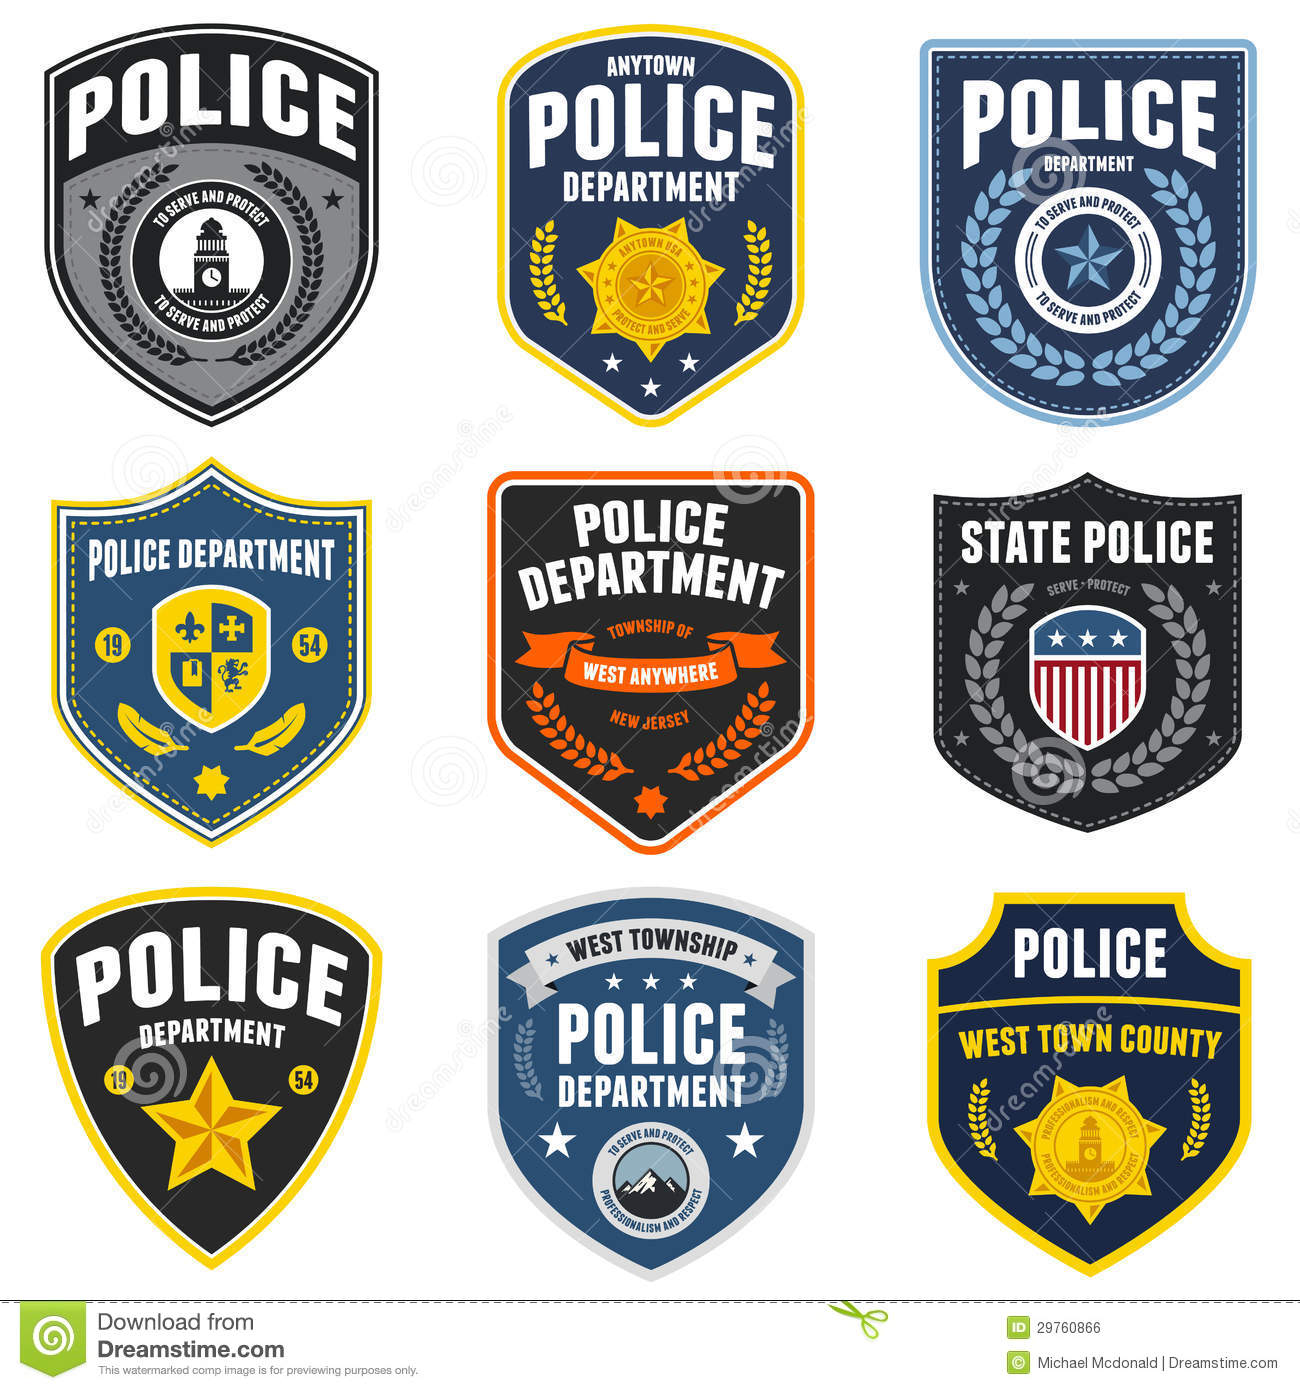 Police Clipart.